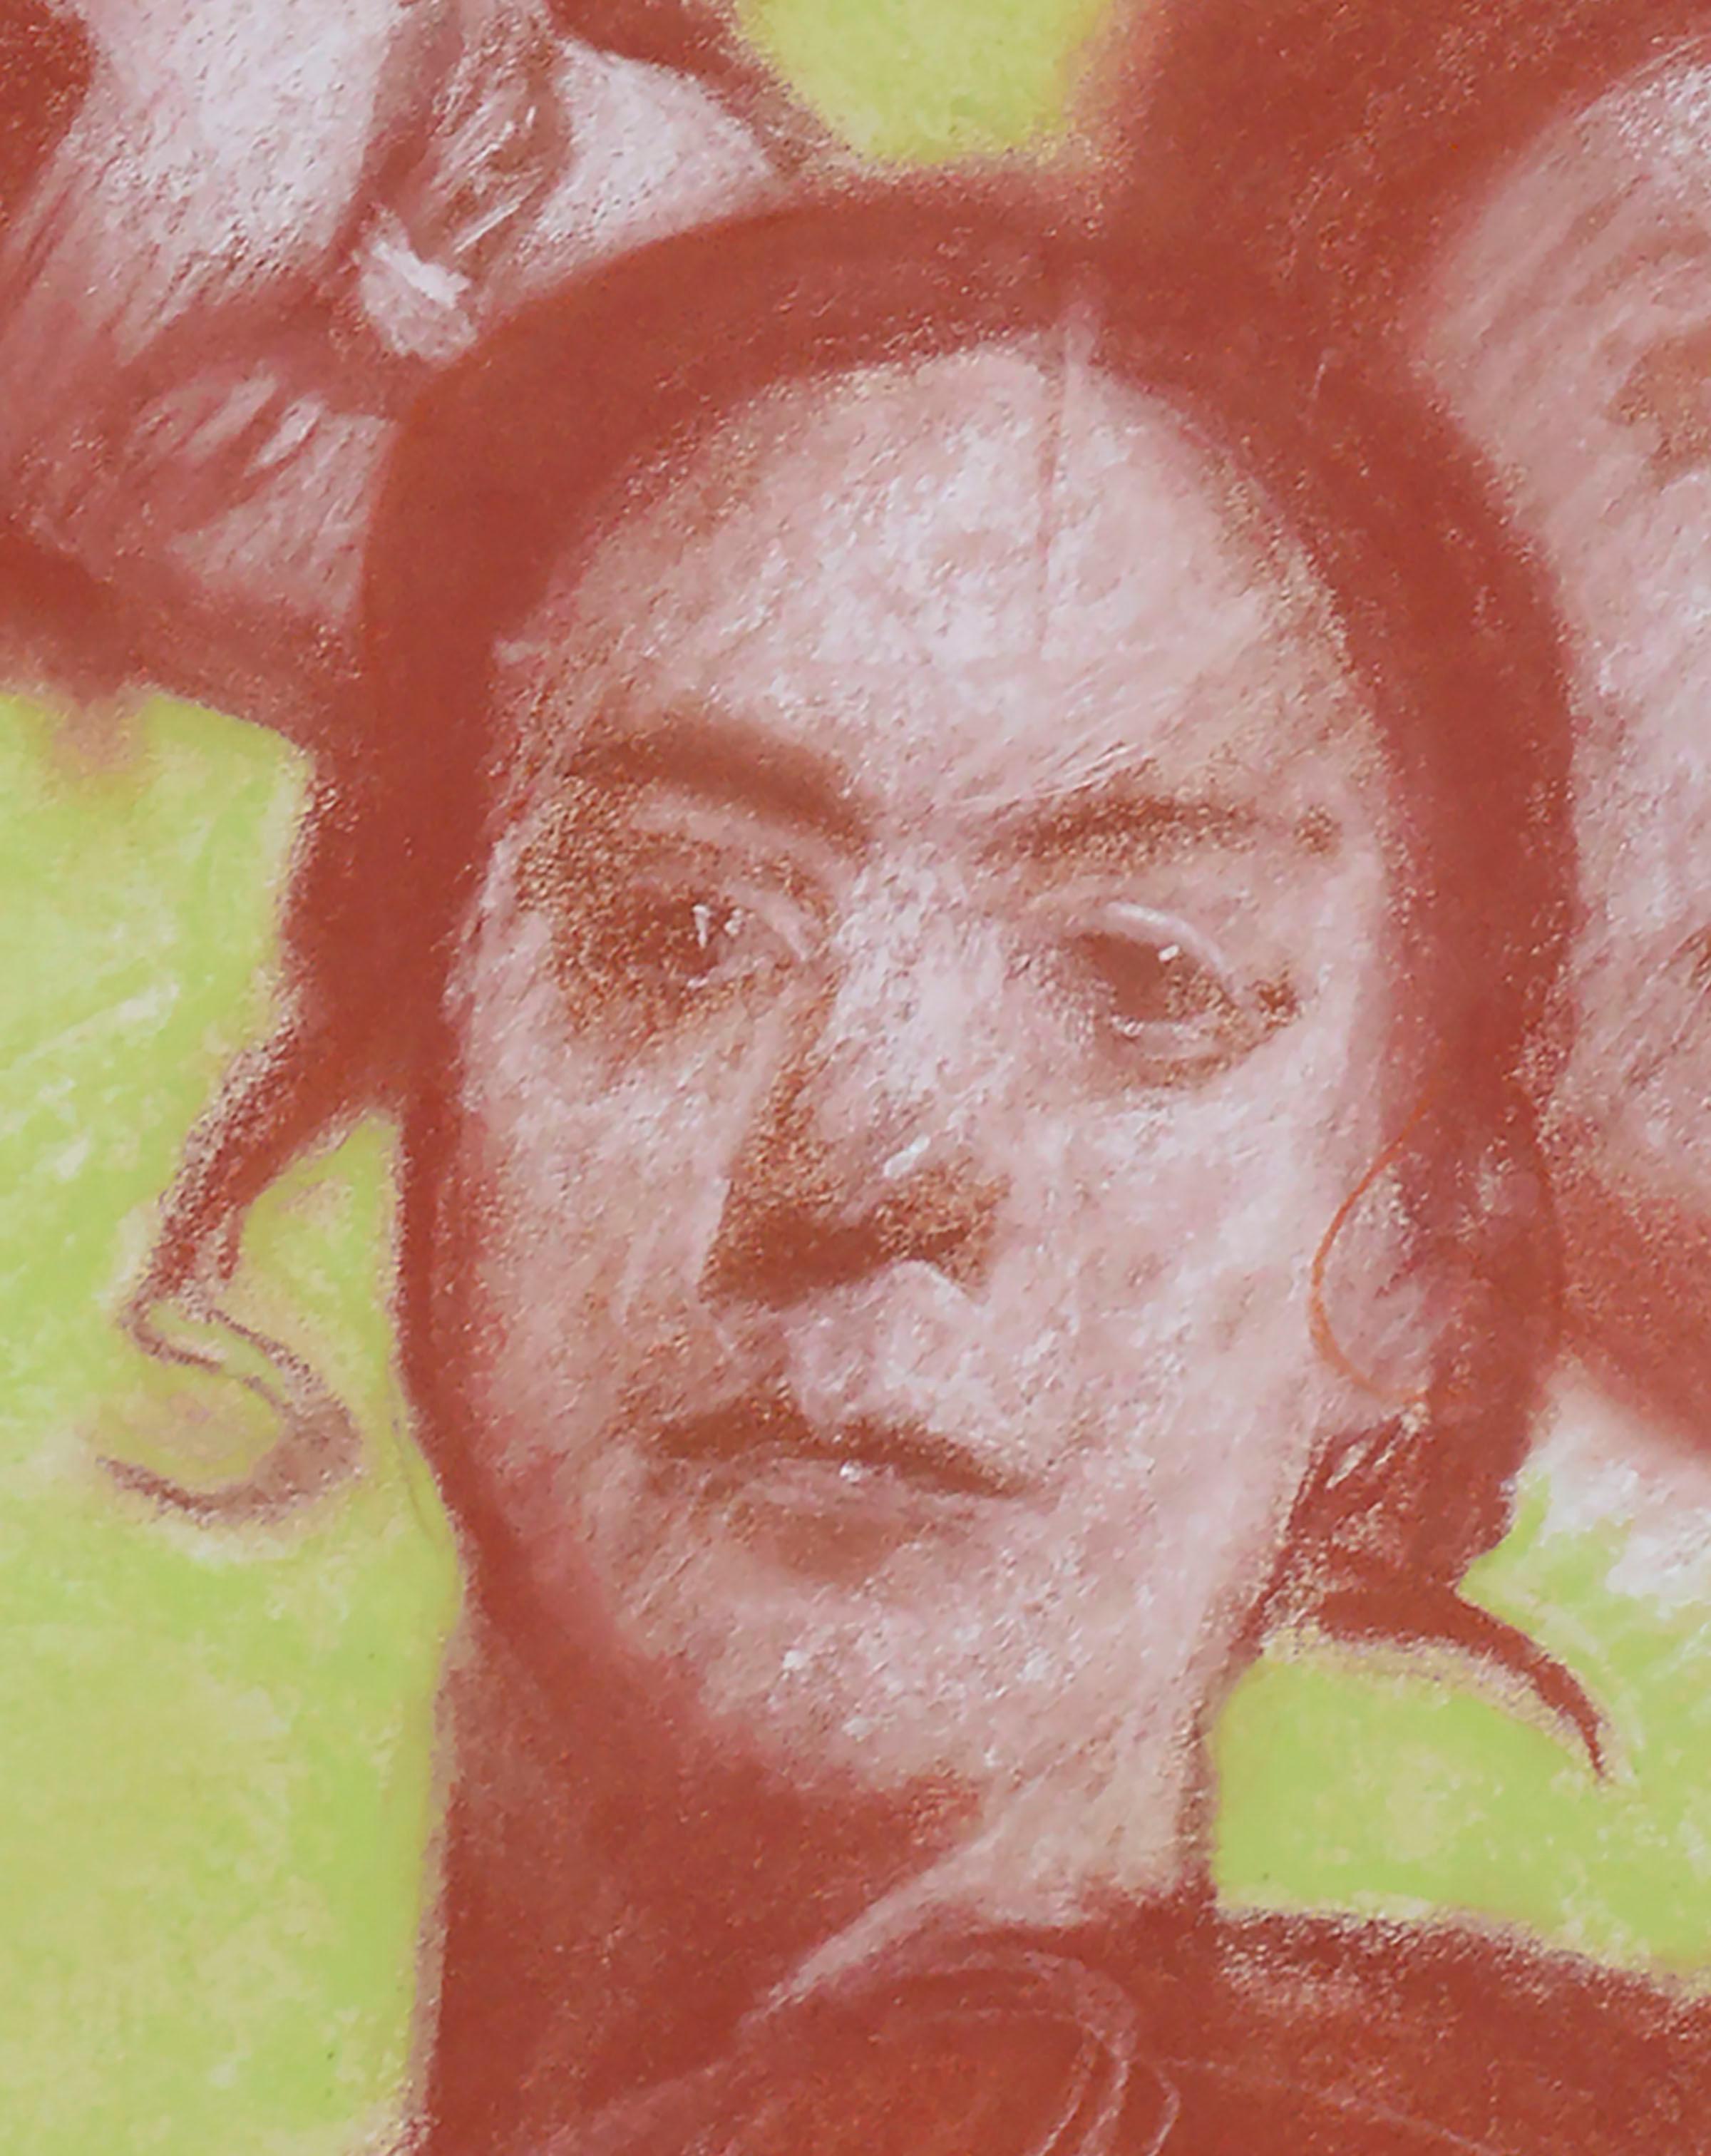 Red and green pastel portrait study of four faces in different poses, one male and one female, by Visionary artist Clayton Anderson (American, b. 1943). Signed and dated 